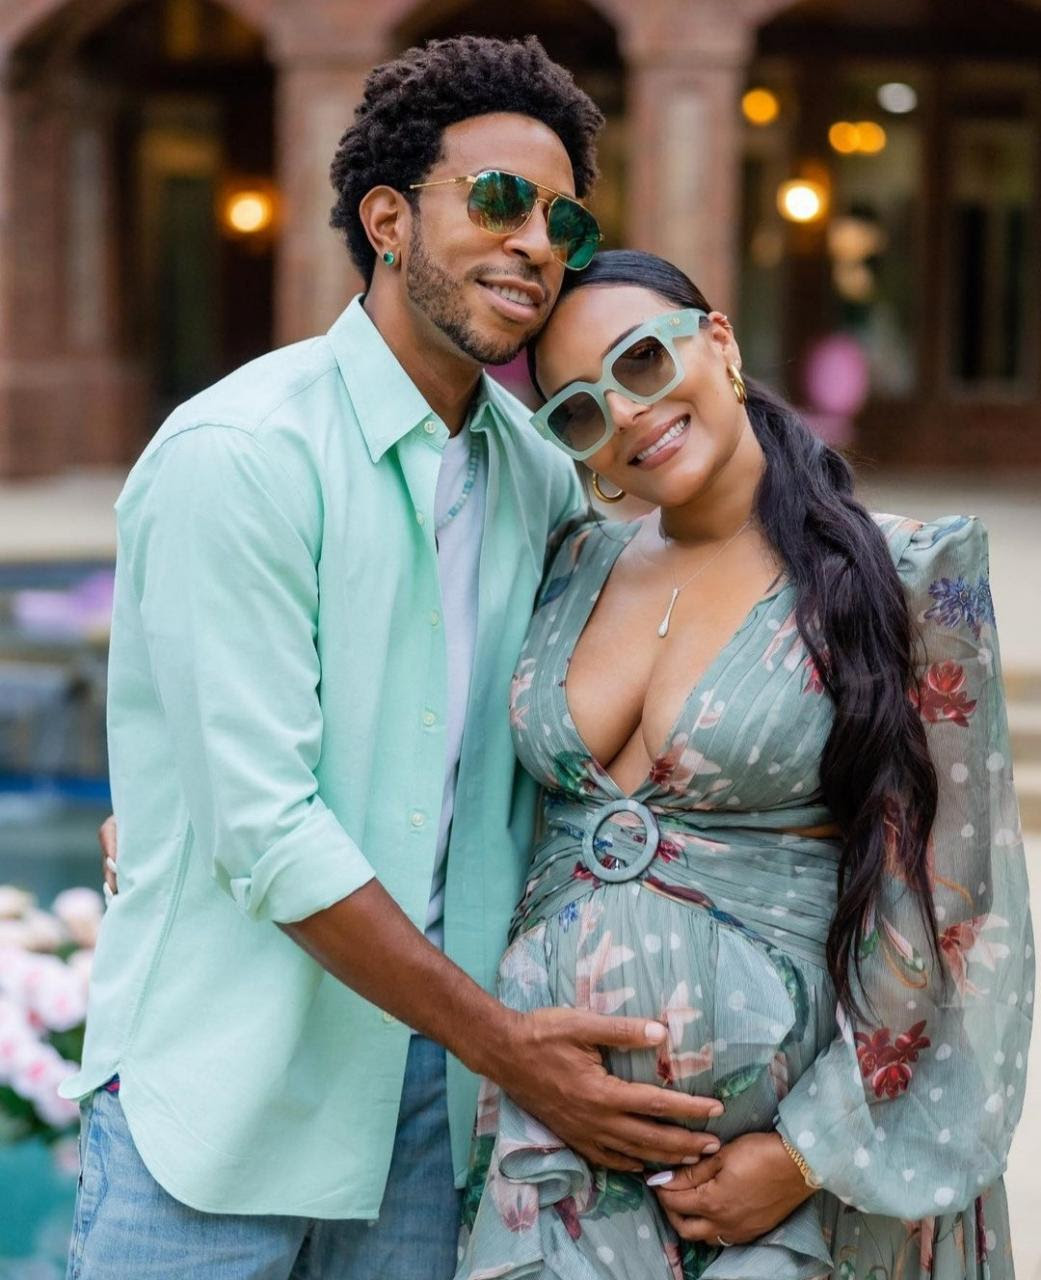 Ludacris and wife Eudoxie pictured at suprise baby shower thrown by friends (photos)